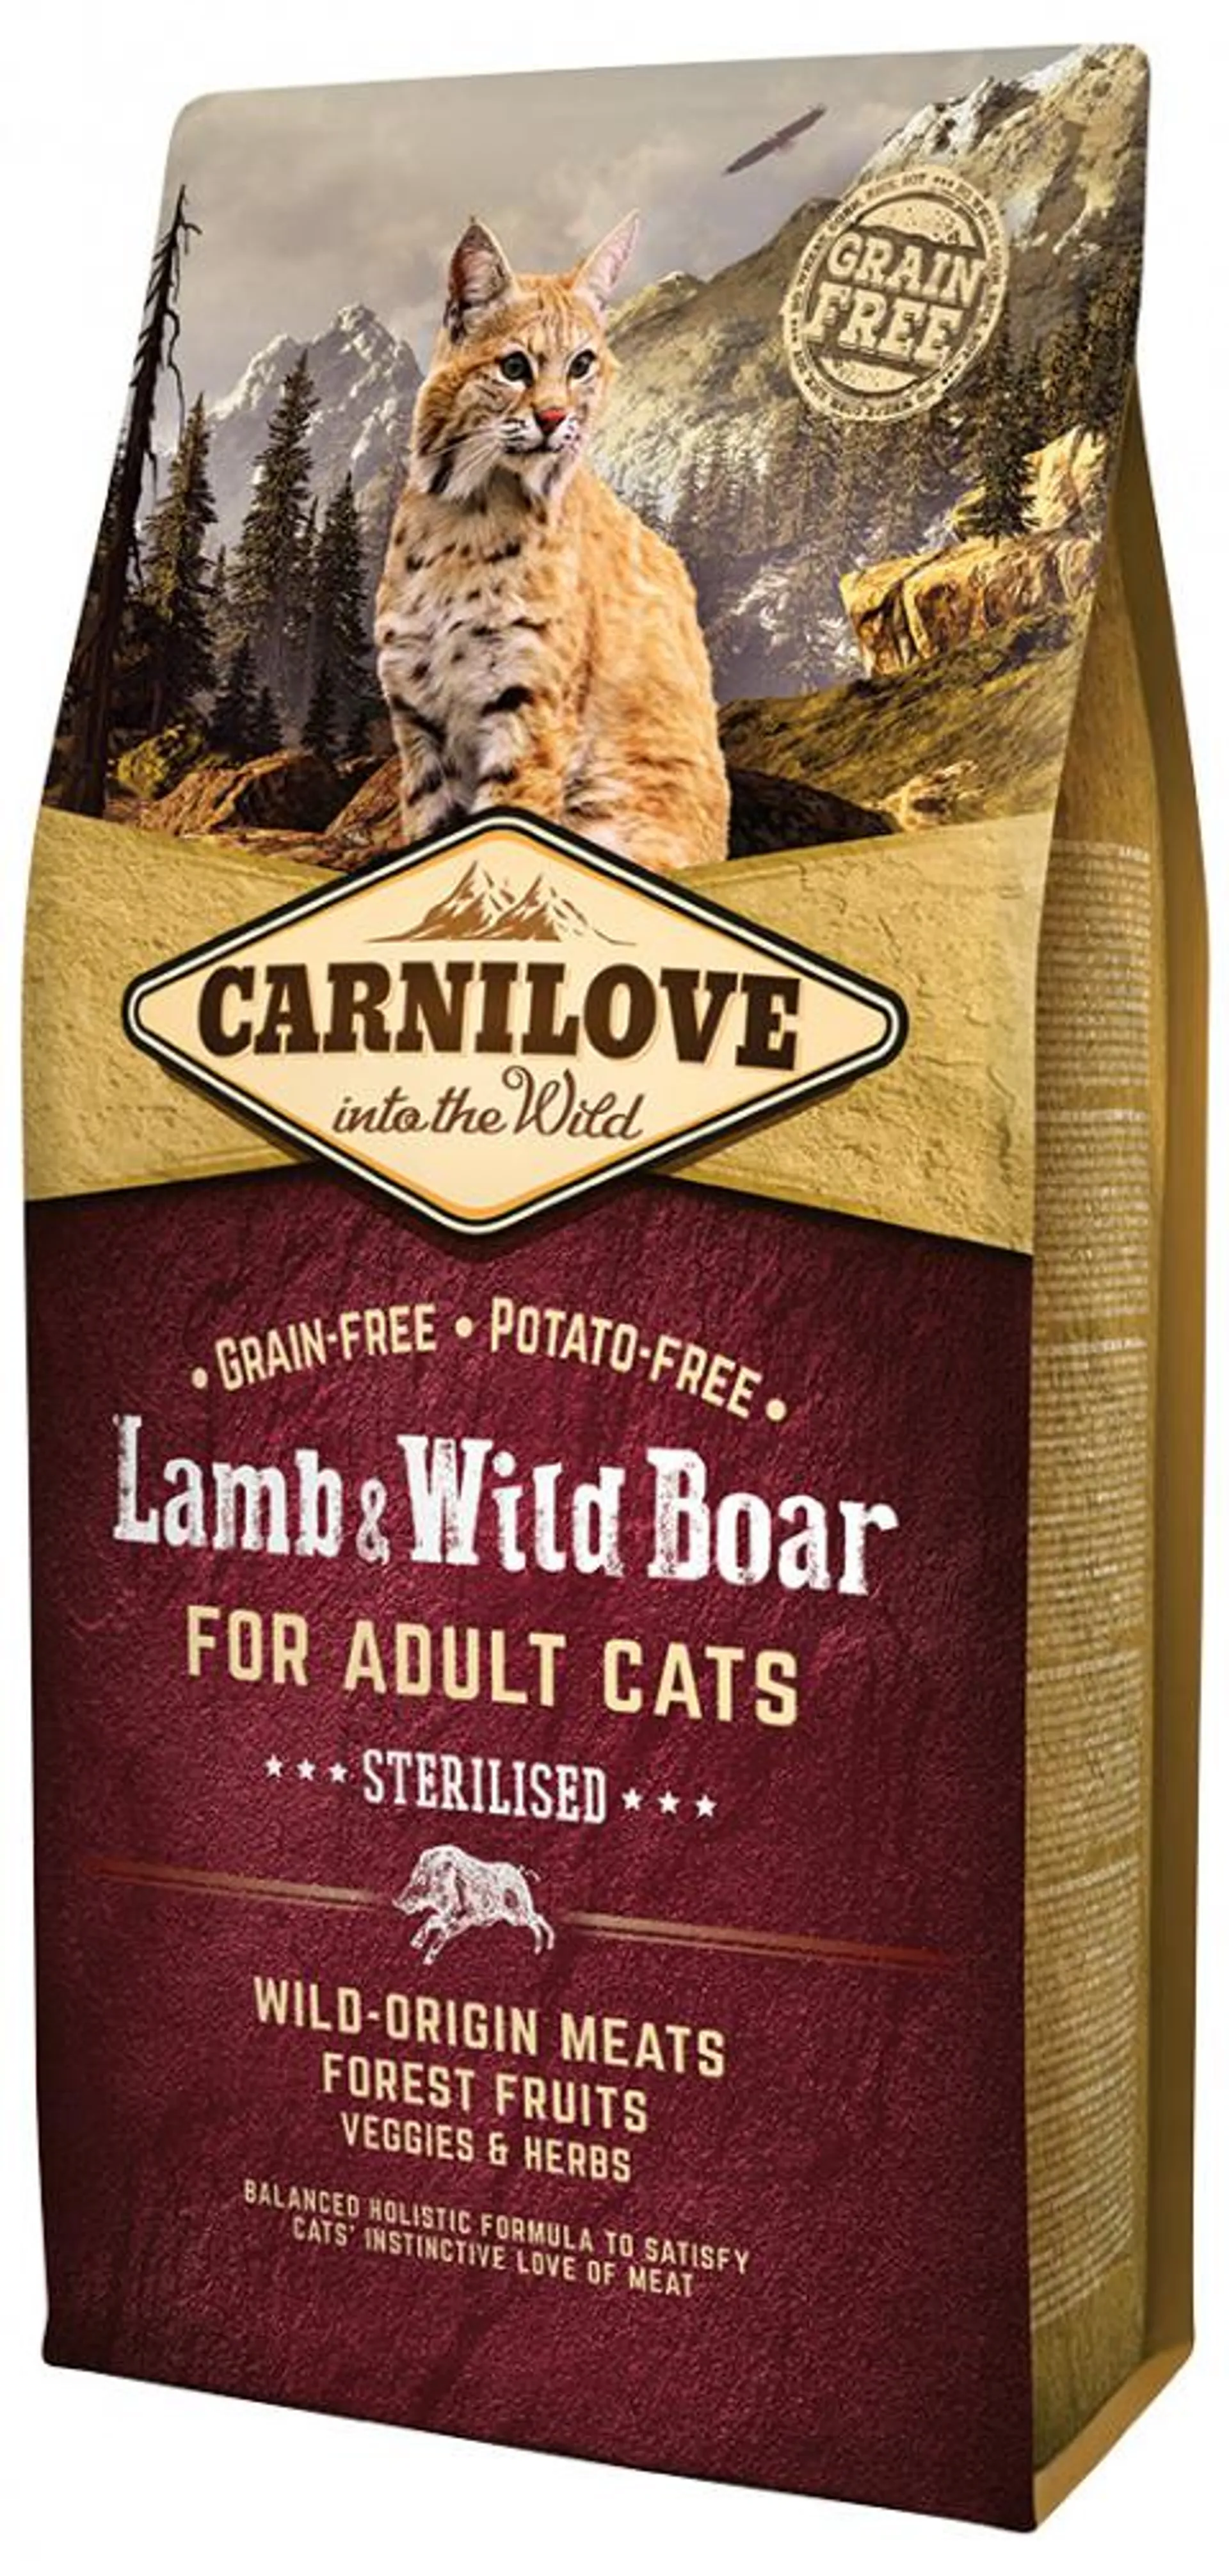 Carnilove Lamb and Wild Boar Adult Cats - Sterilised 6kg